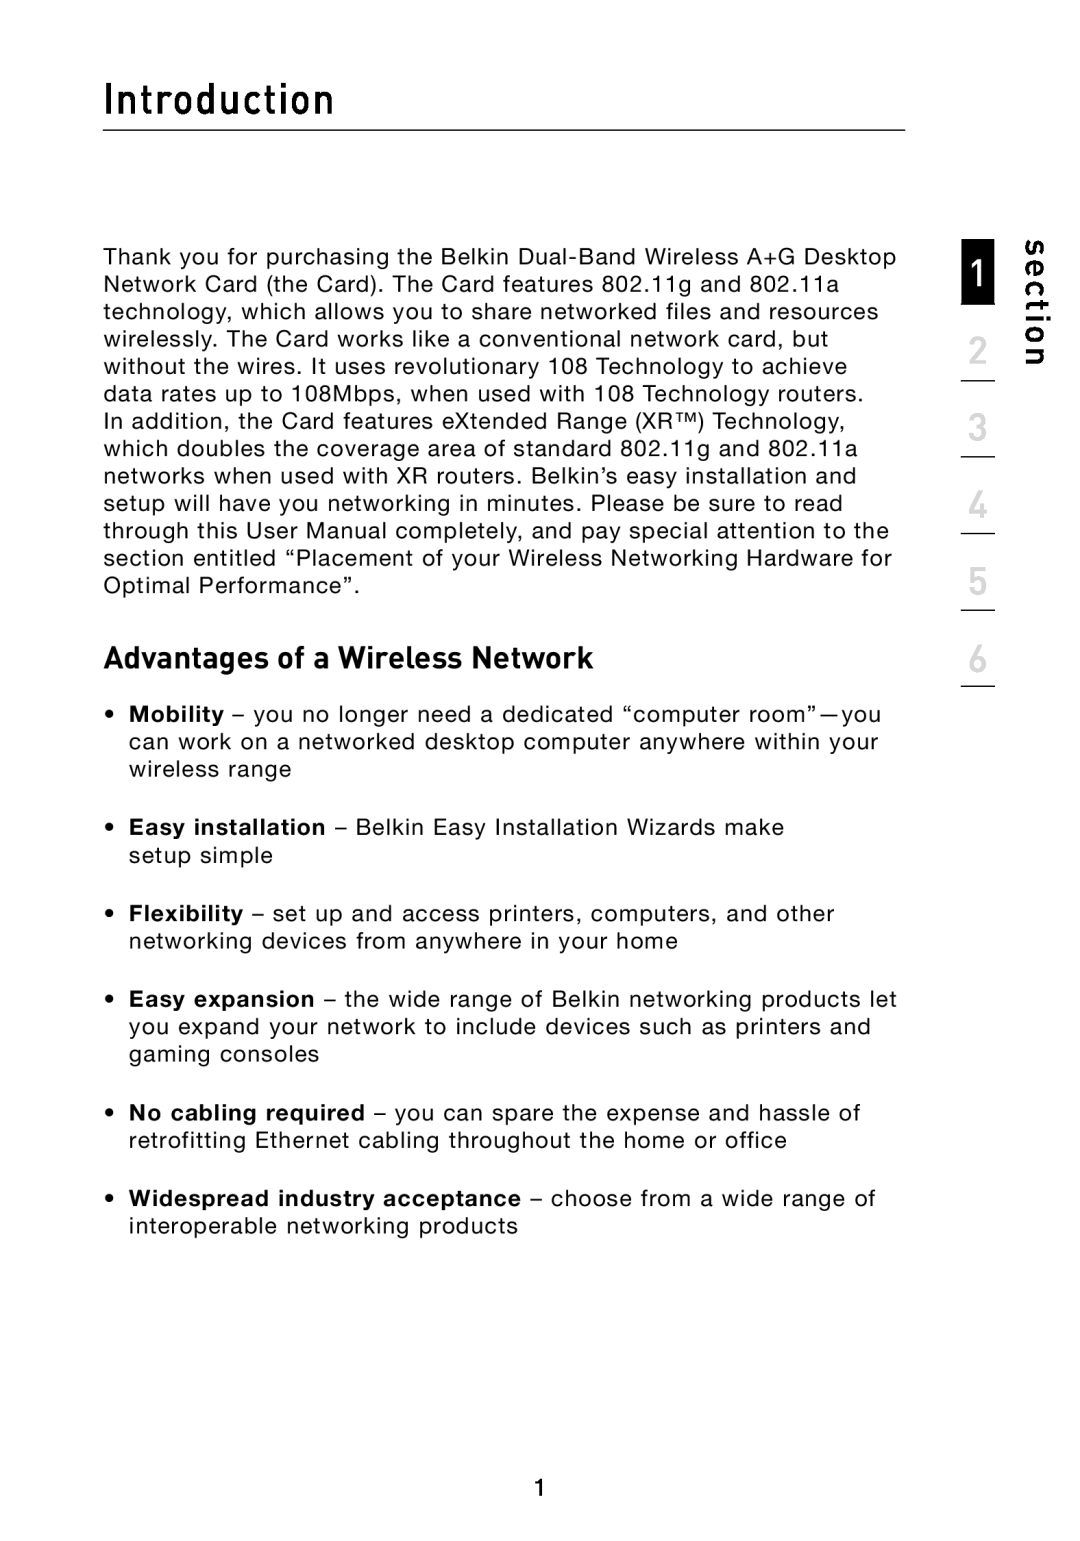 Belkin F6D3000 user manual Introduction, section, Advantages of a Wireless Network 